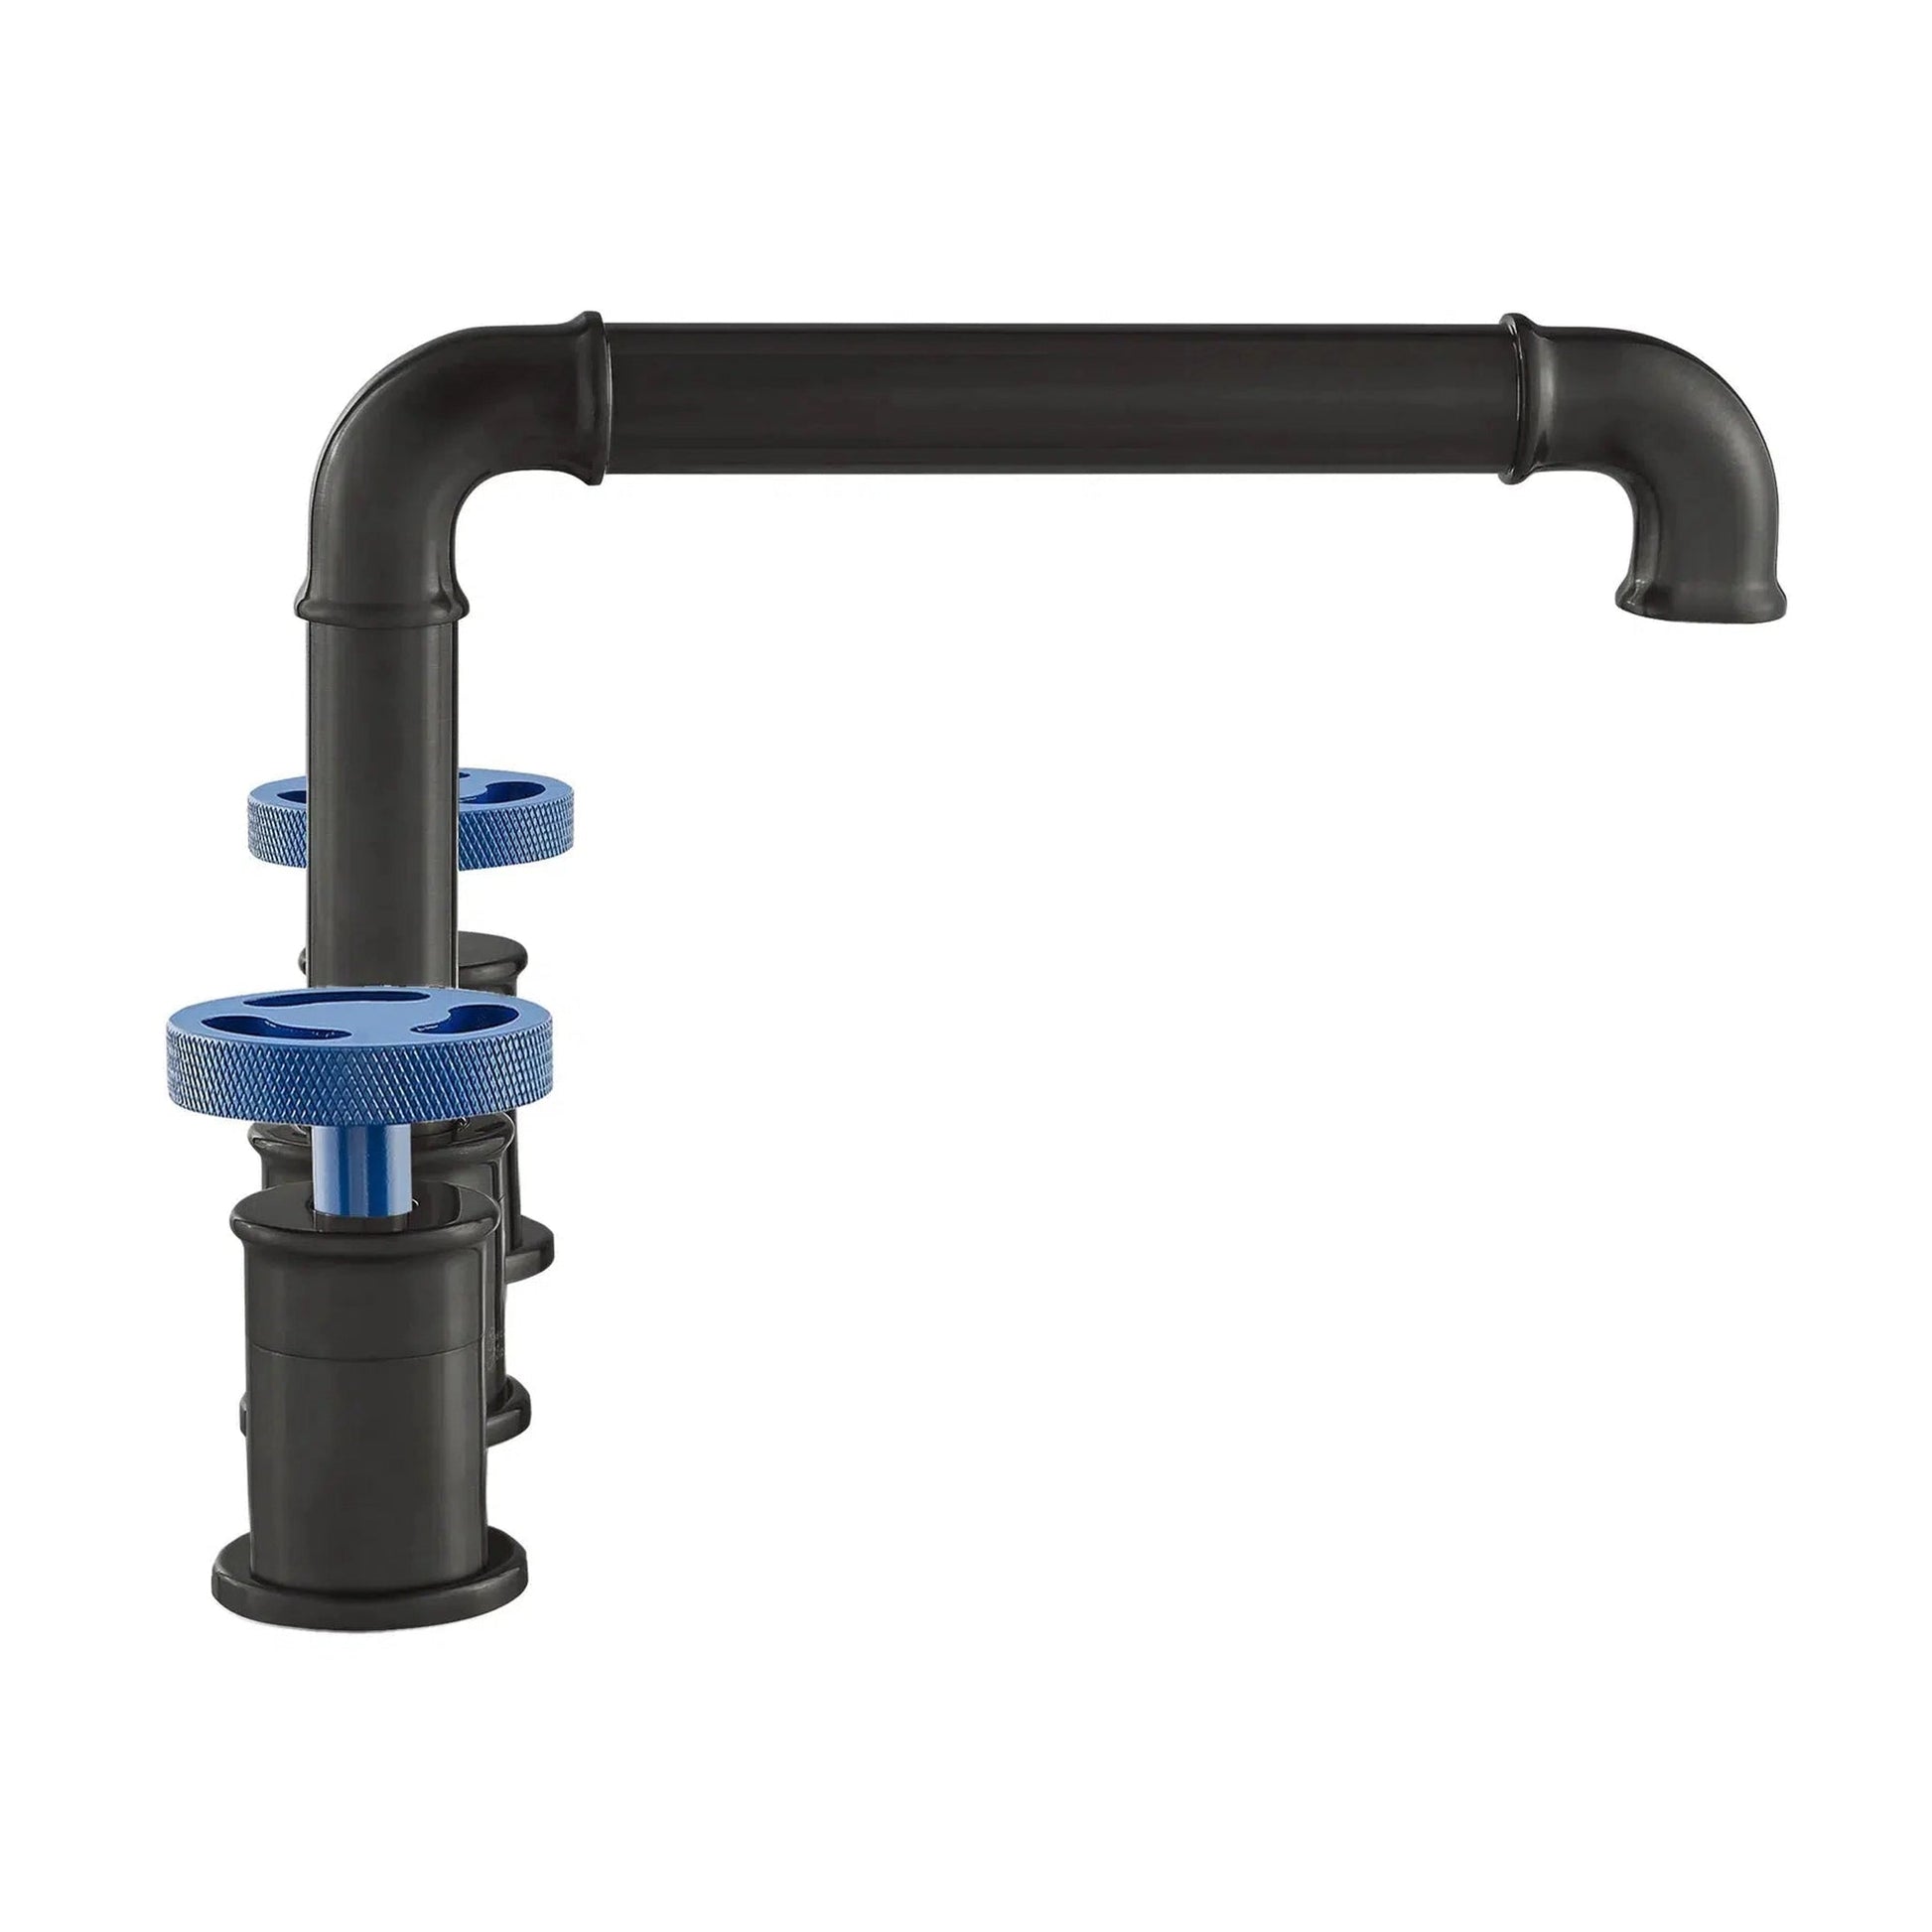 Swiss Madison Avallon 8" Widespread Matte Black Bathroom Faucet With Blue Wheel Handle and 1.2 GPM Flow Rate